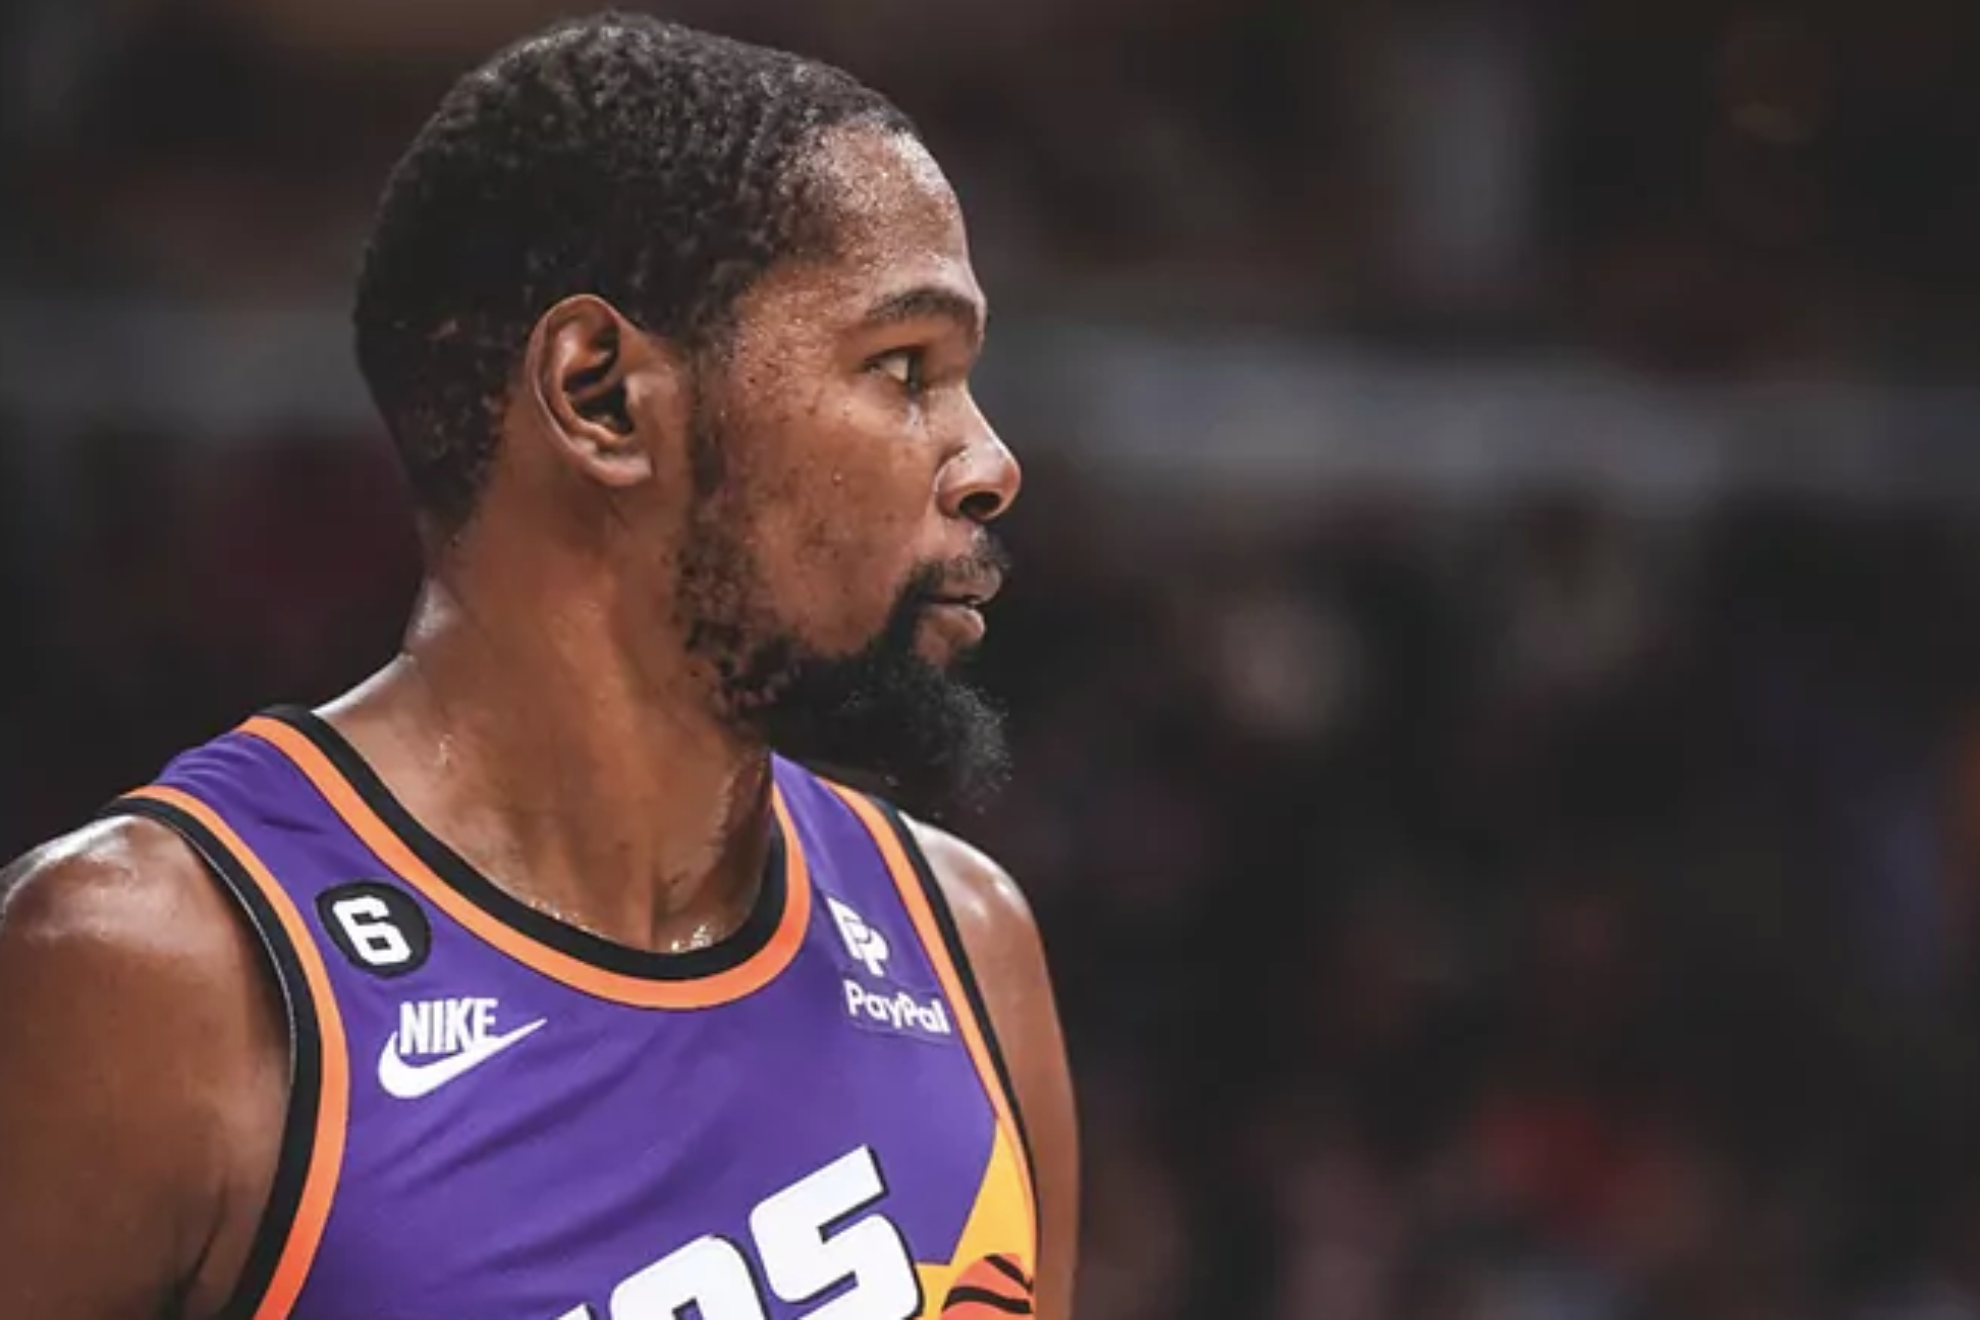 Kevin Durant is aware of the stakes in Phoenix